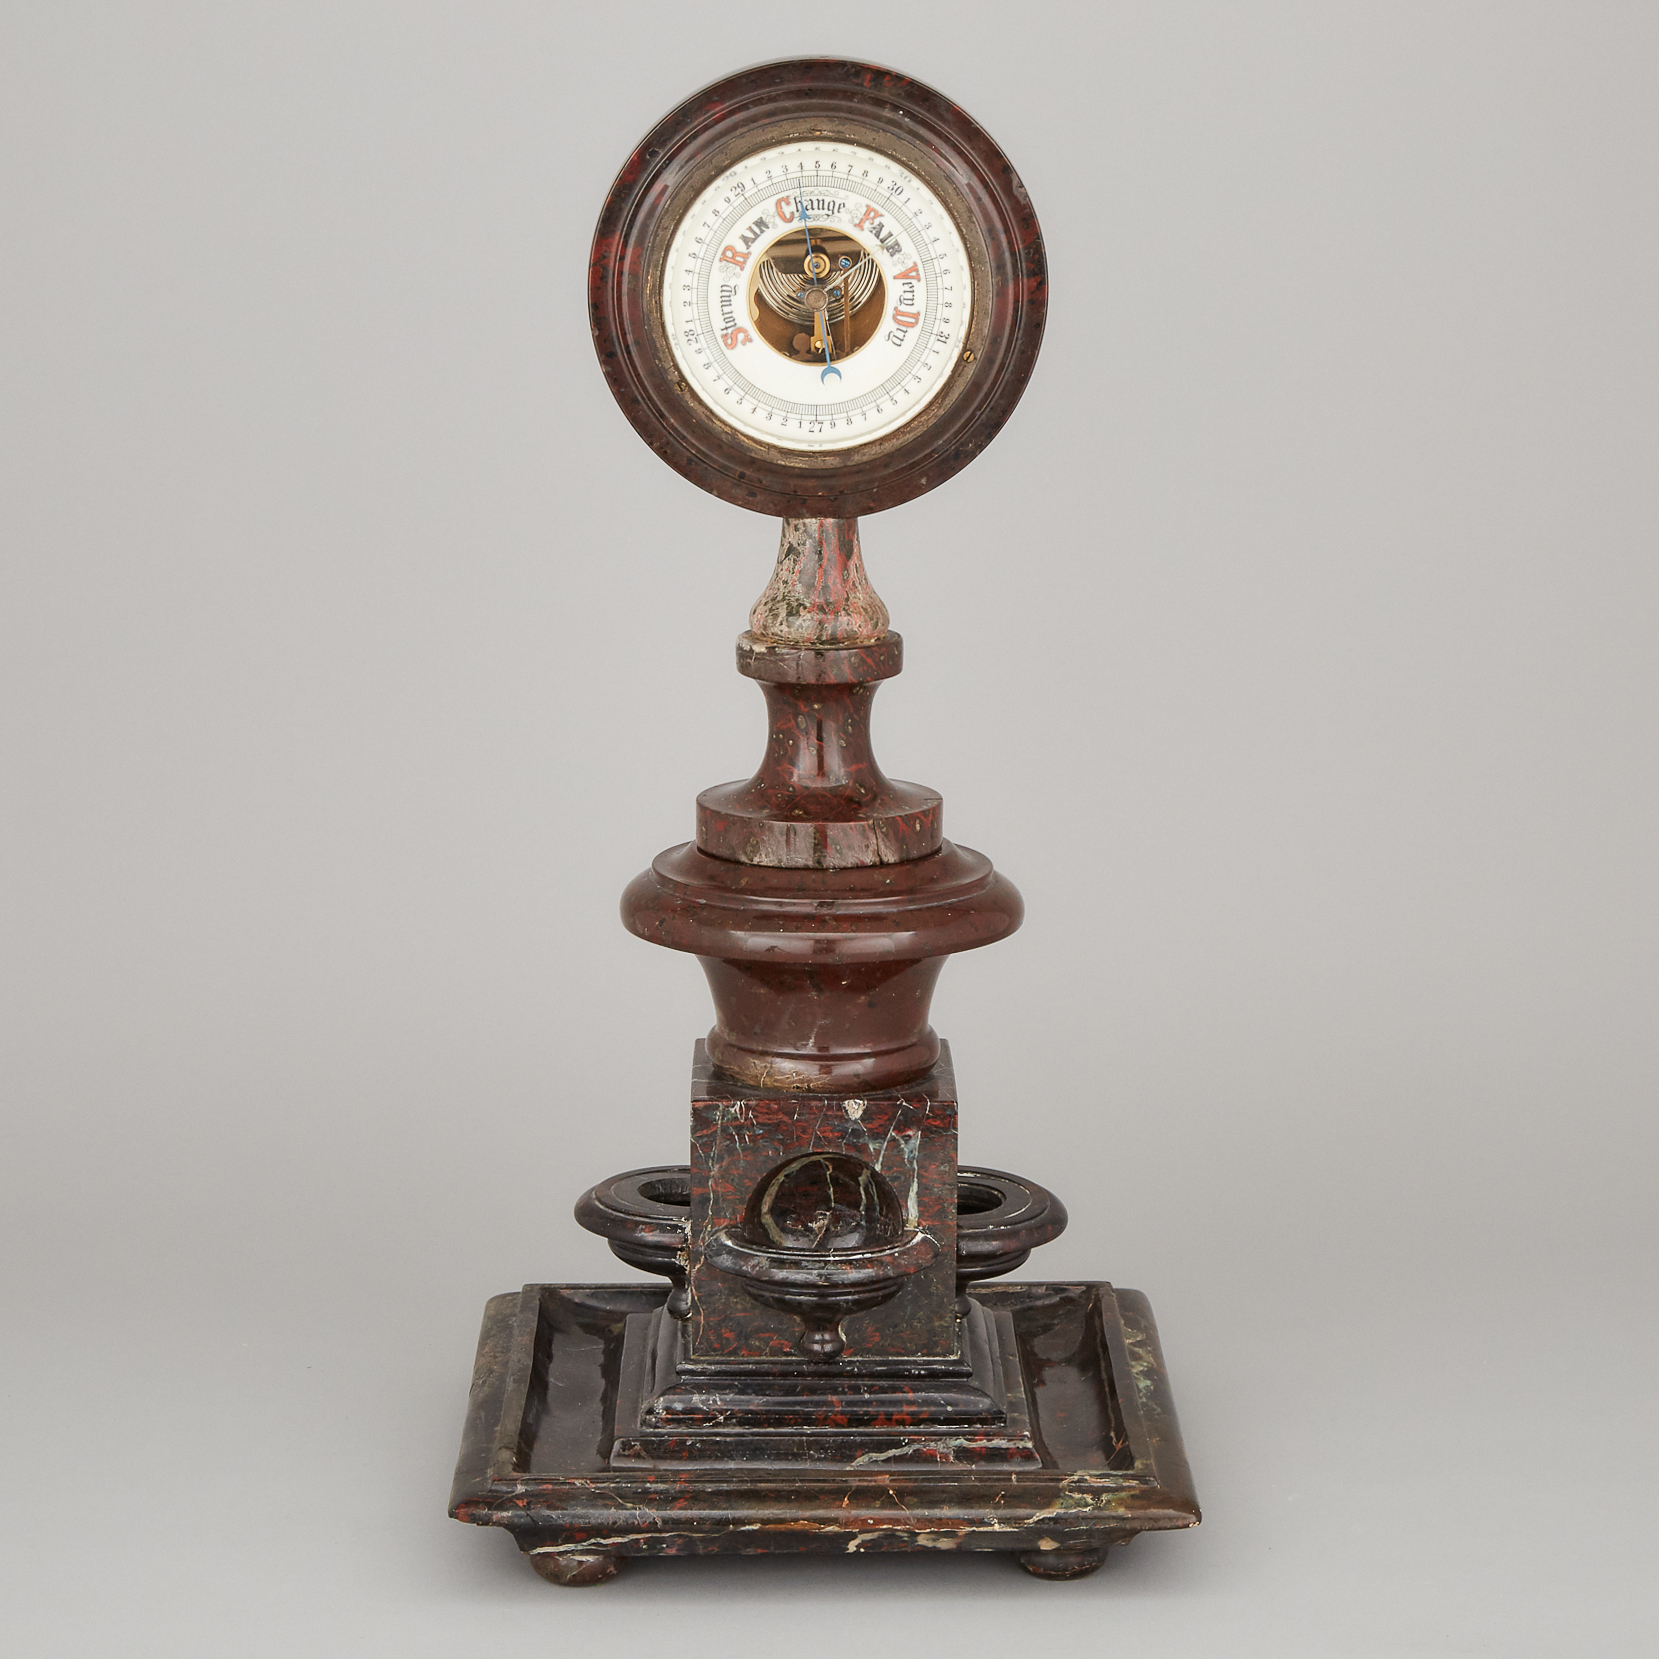 Turned and Moulded Marble Bank Barometer, c.1910